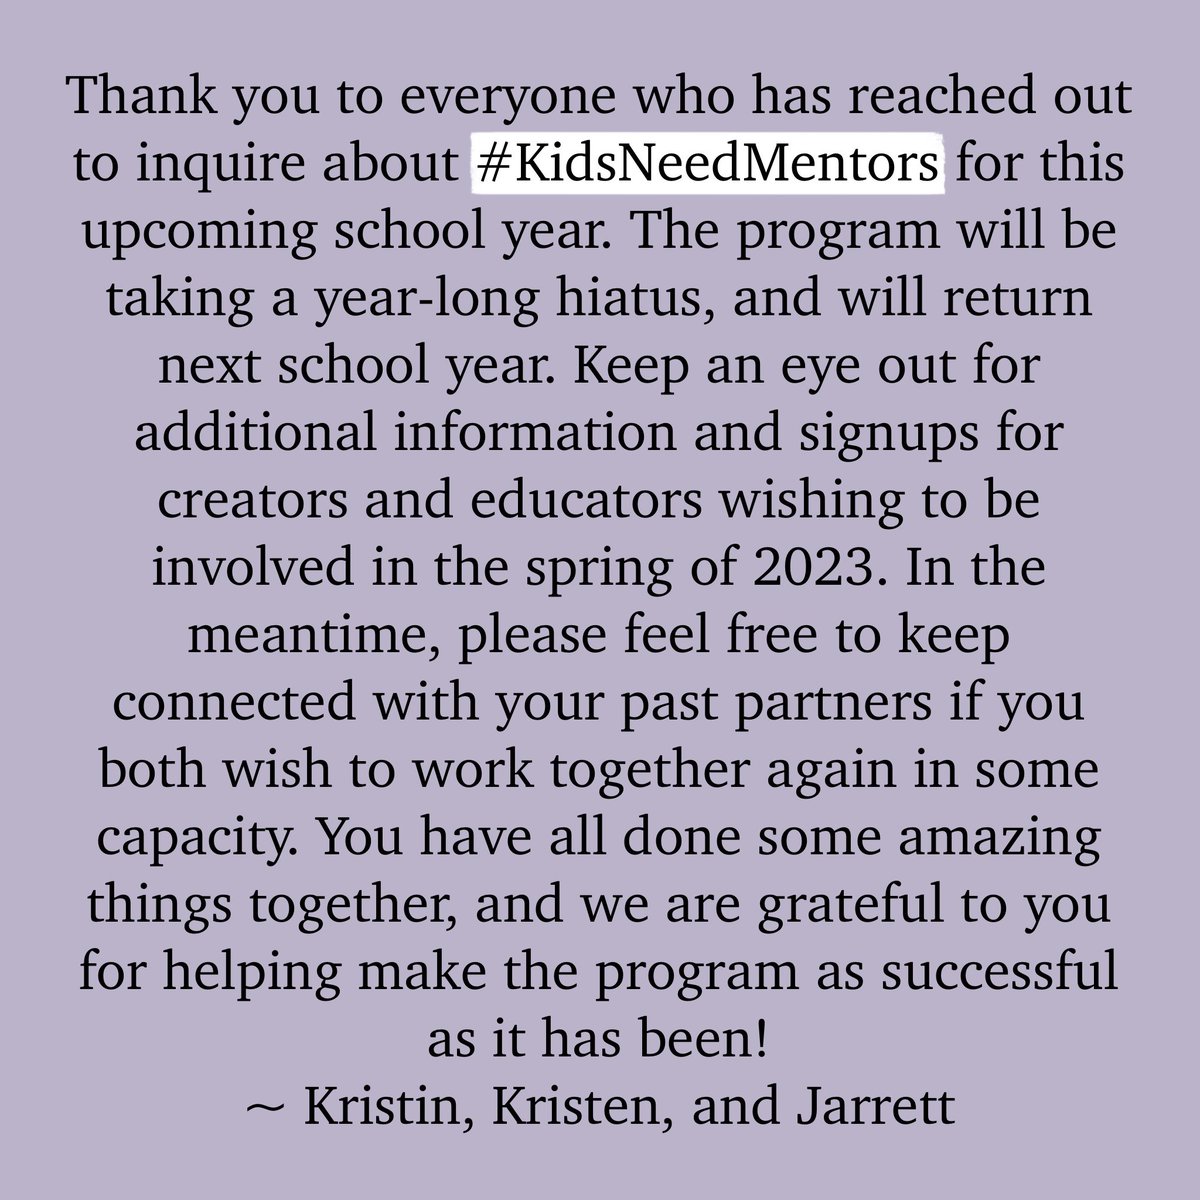 A message from the #KidsNeedMentors team.